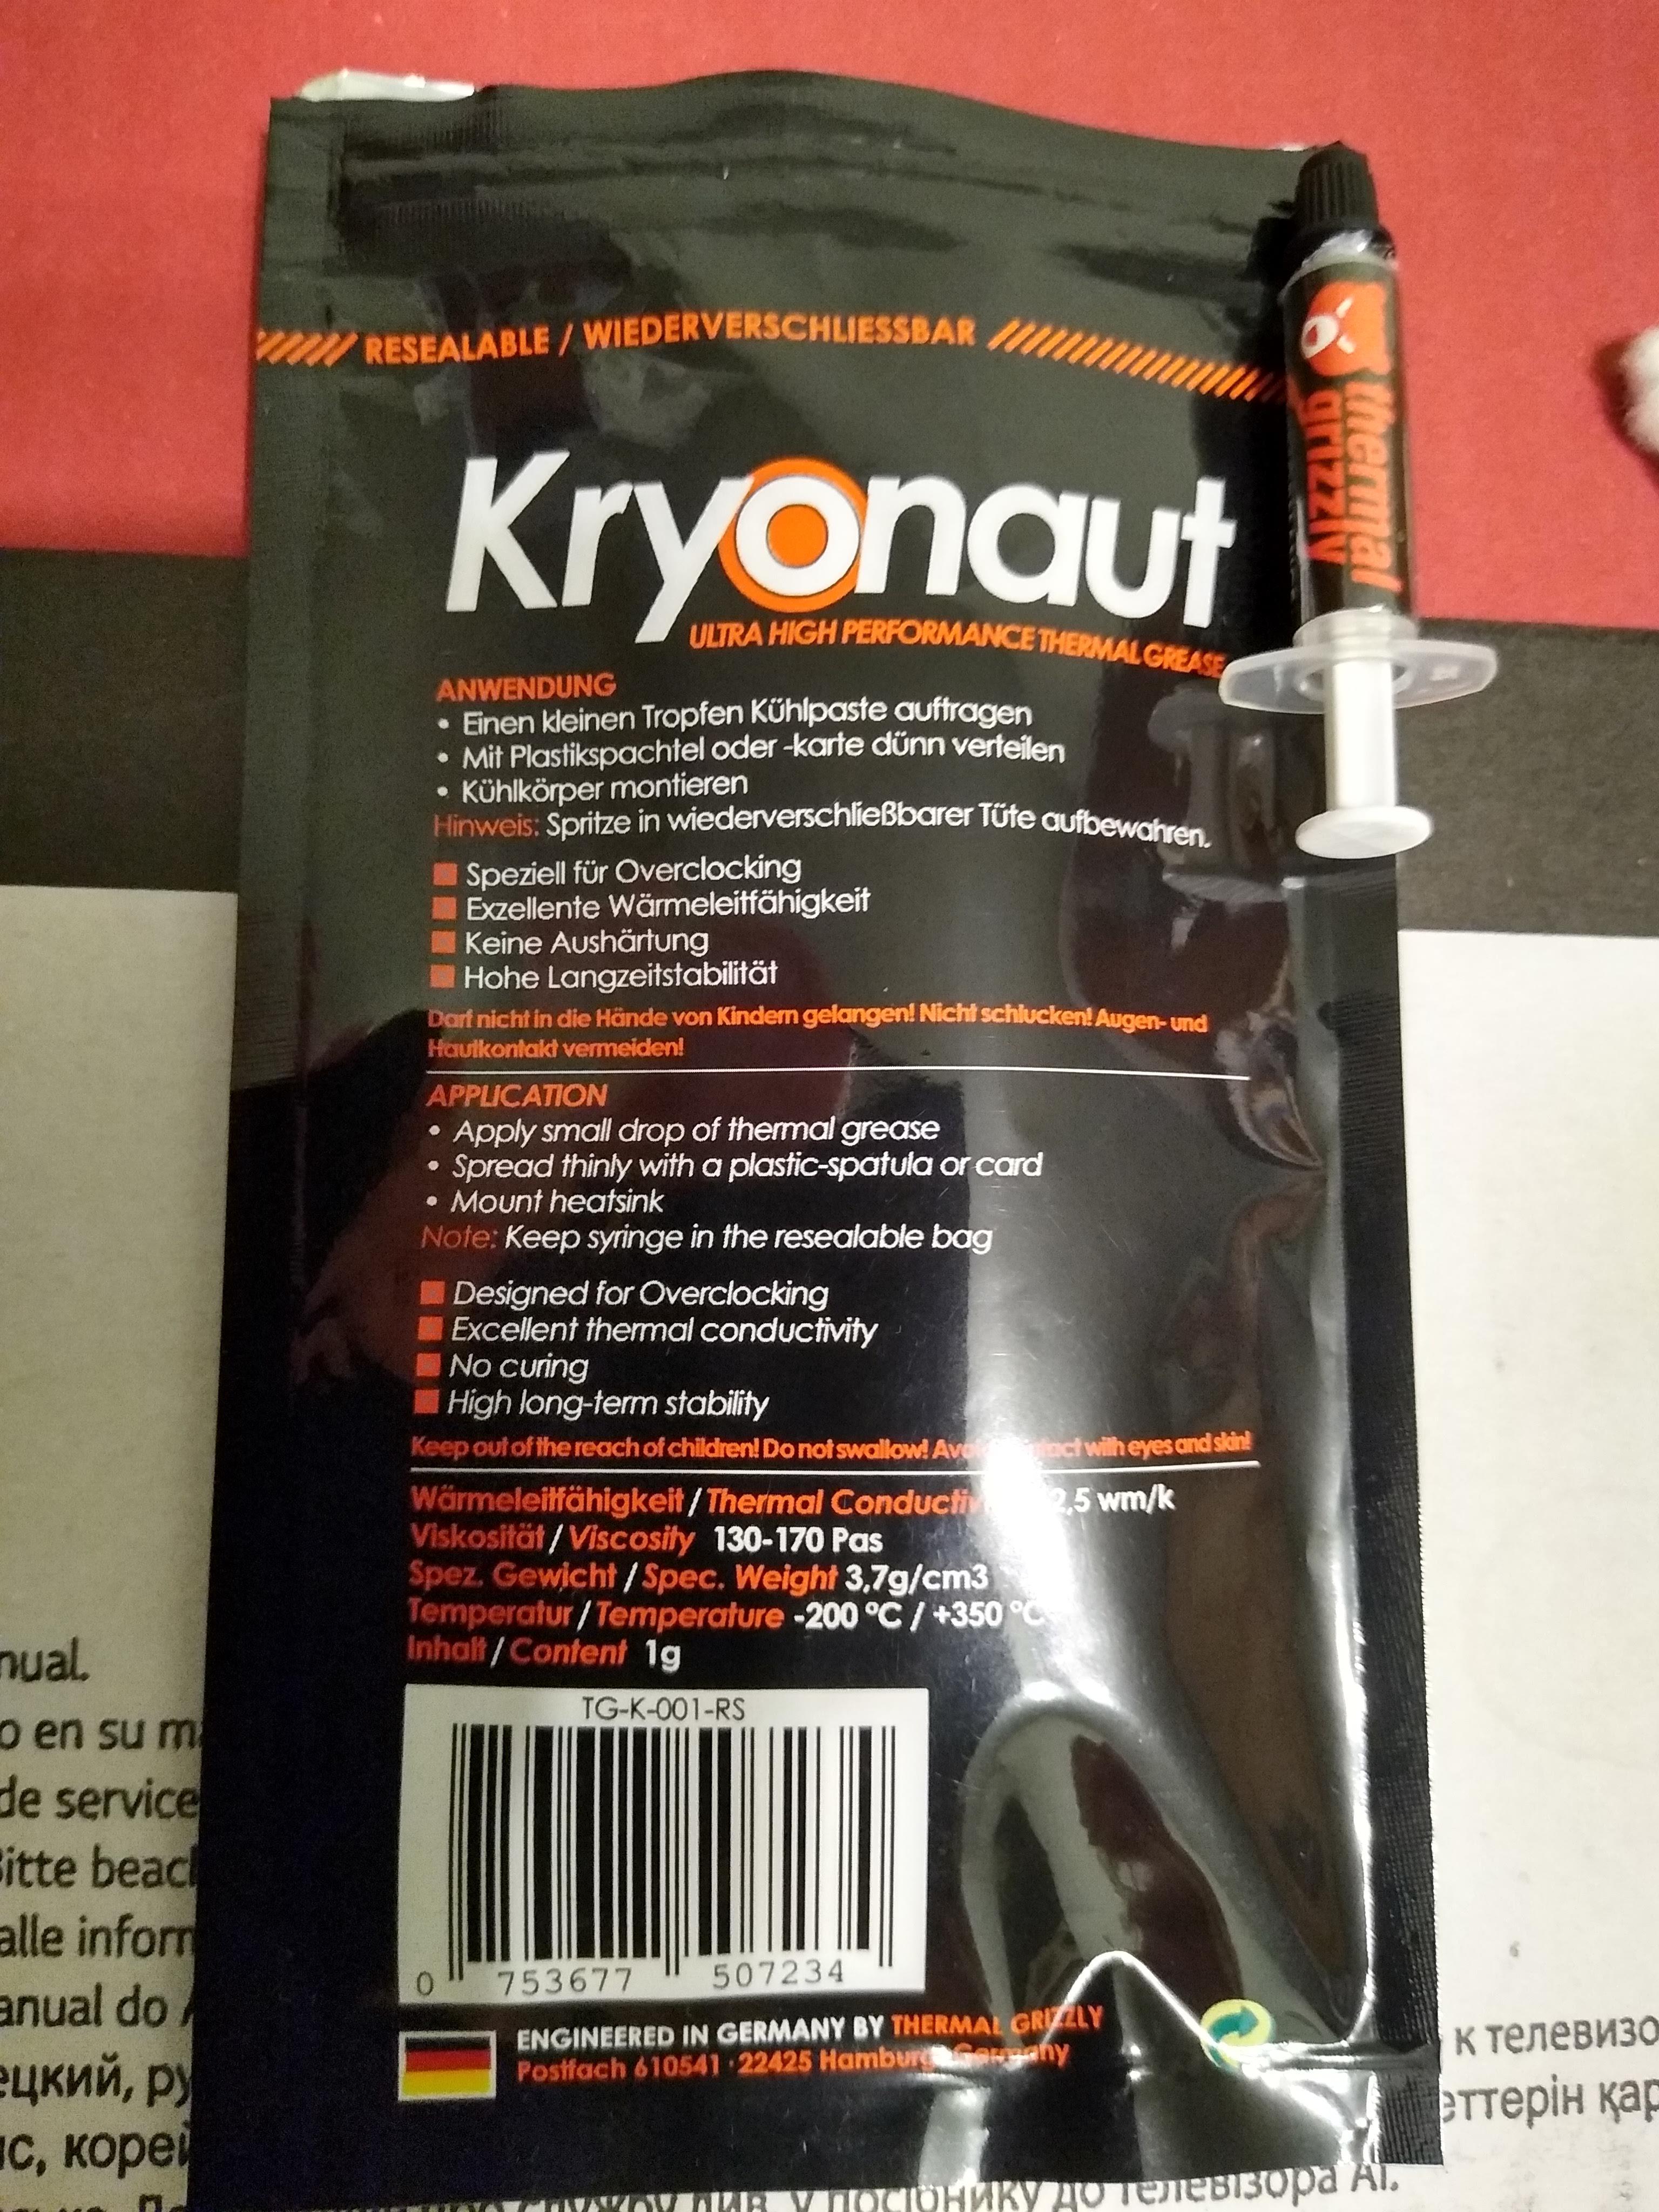 Does THERMAL GRIZZLY KRYONAUT Degrade? 